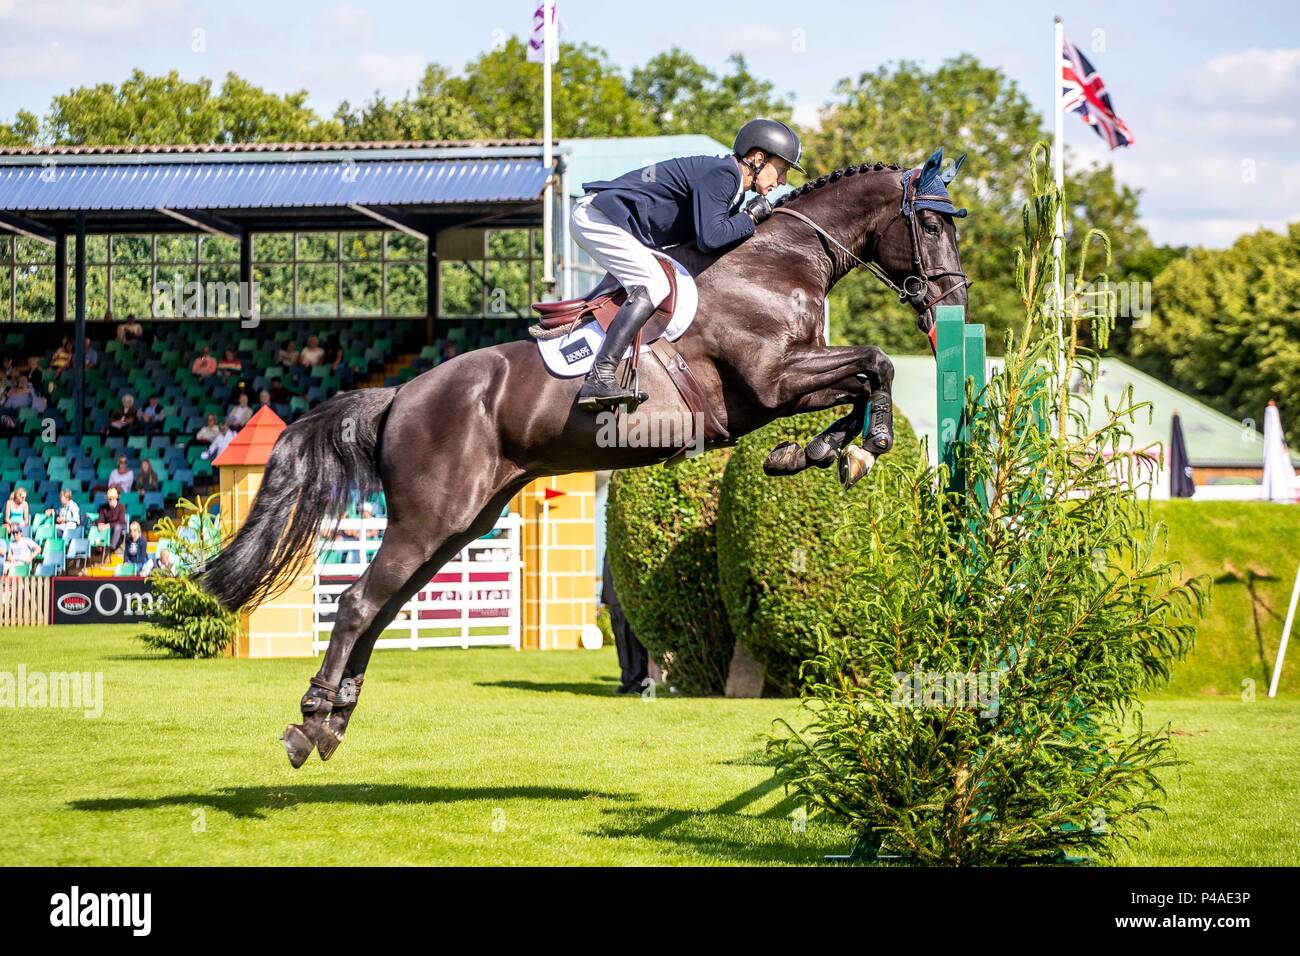 Steven Franks riding Abdul Aziz. The Bunn Leisure Derby Tankard. CSI4*. The Al Shira'aa Hickstead Derby Meeting. Showjumping. The All England Jumping Course. Hickstead. West Sussex. UK. Day 2. 21/06/2018. Stock Photo